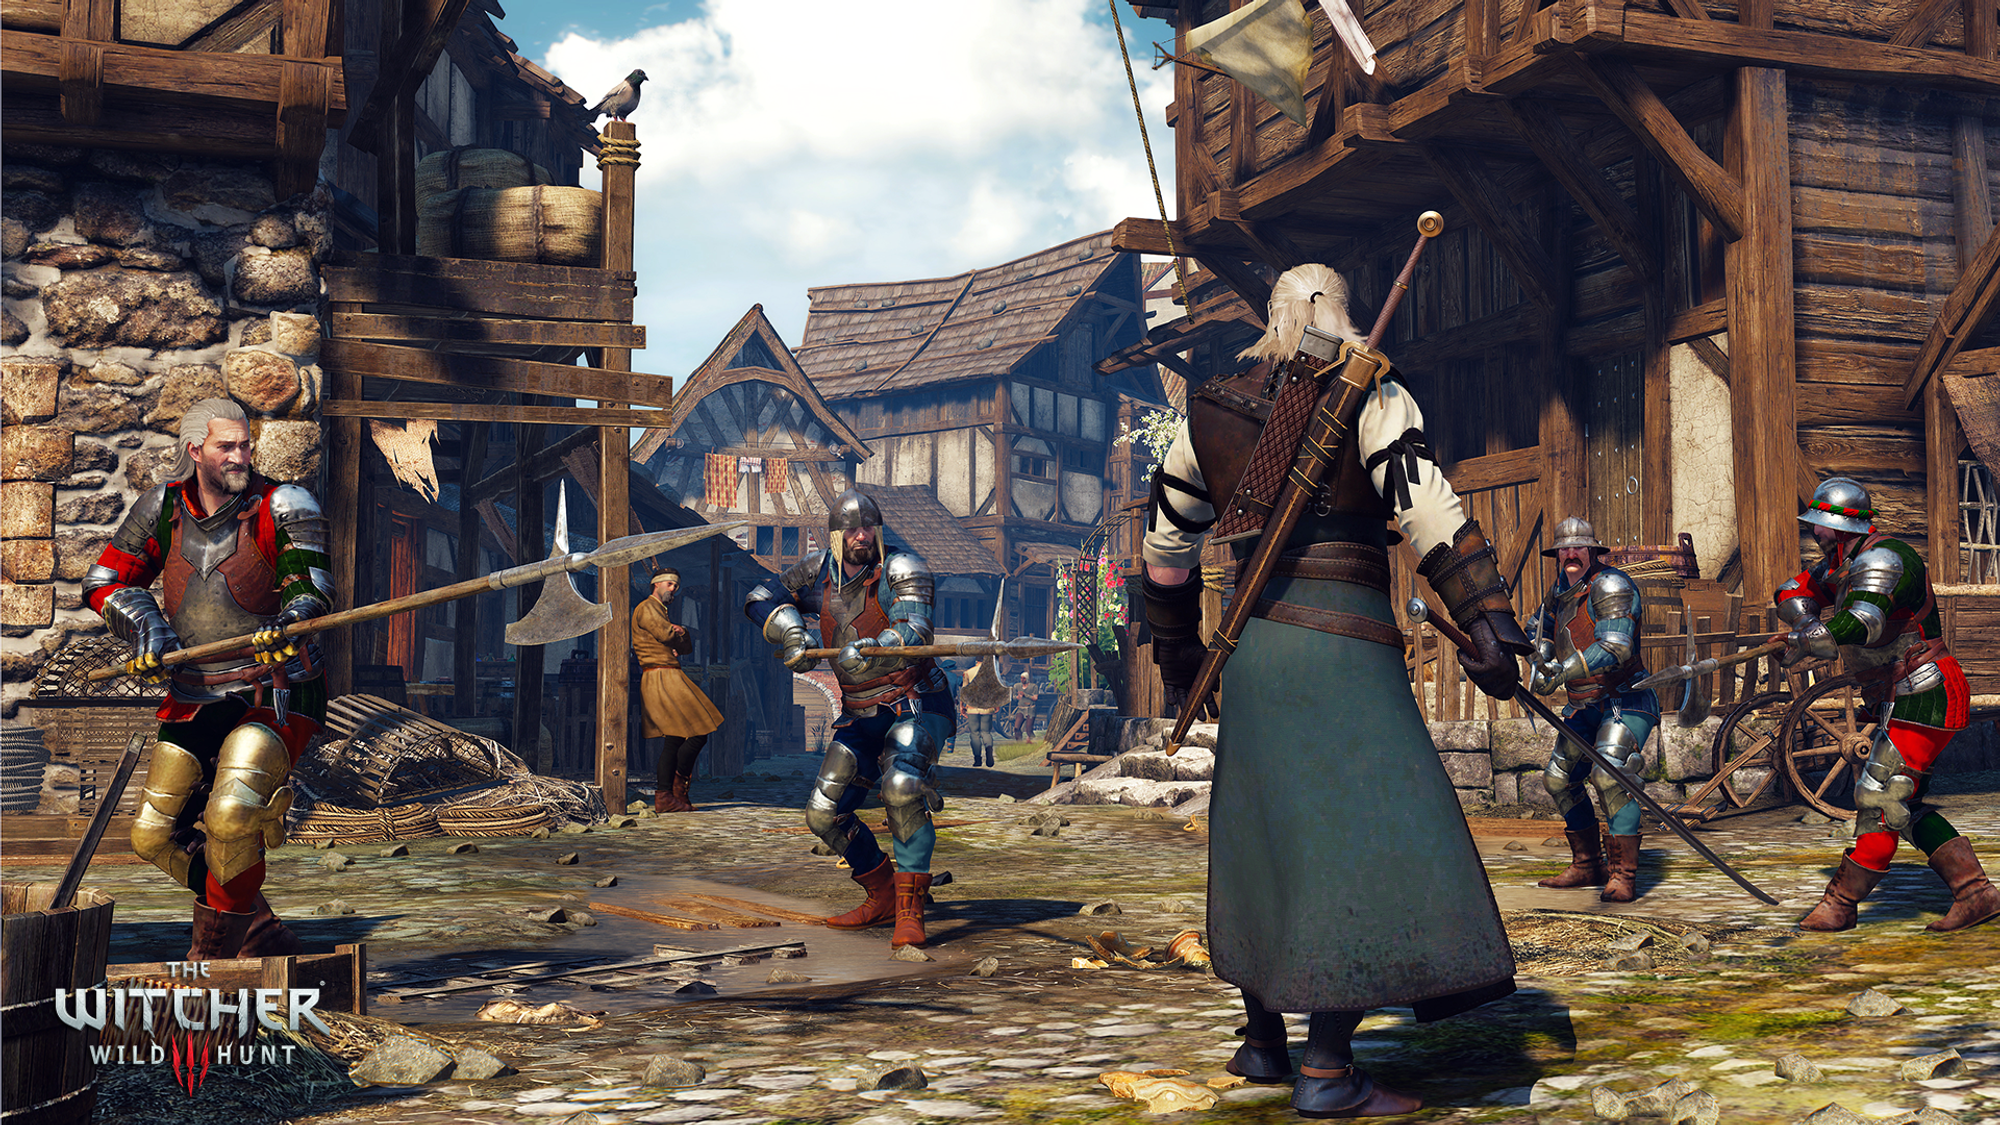 Crafting anywhere with repair kits - Next-Gen Compatible at The Witcher 3  Nexus - Mods and community